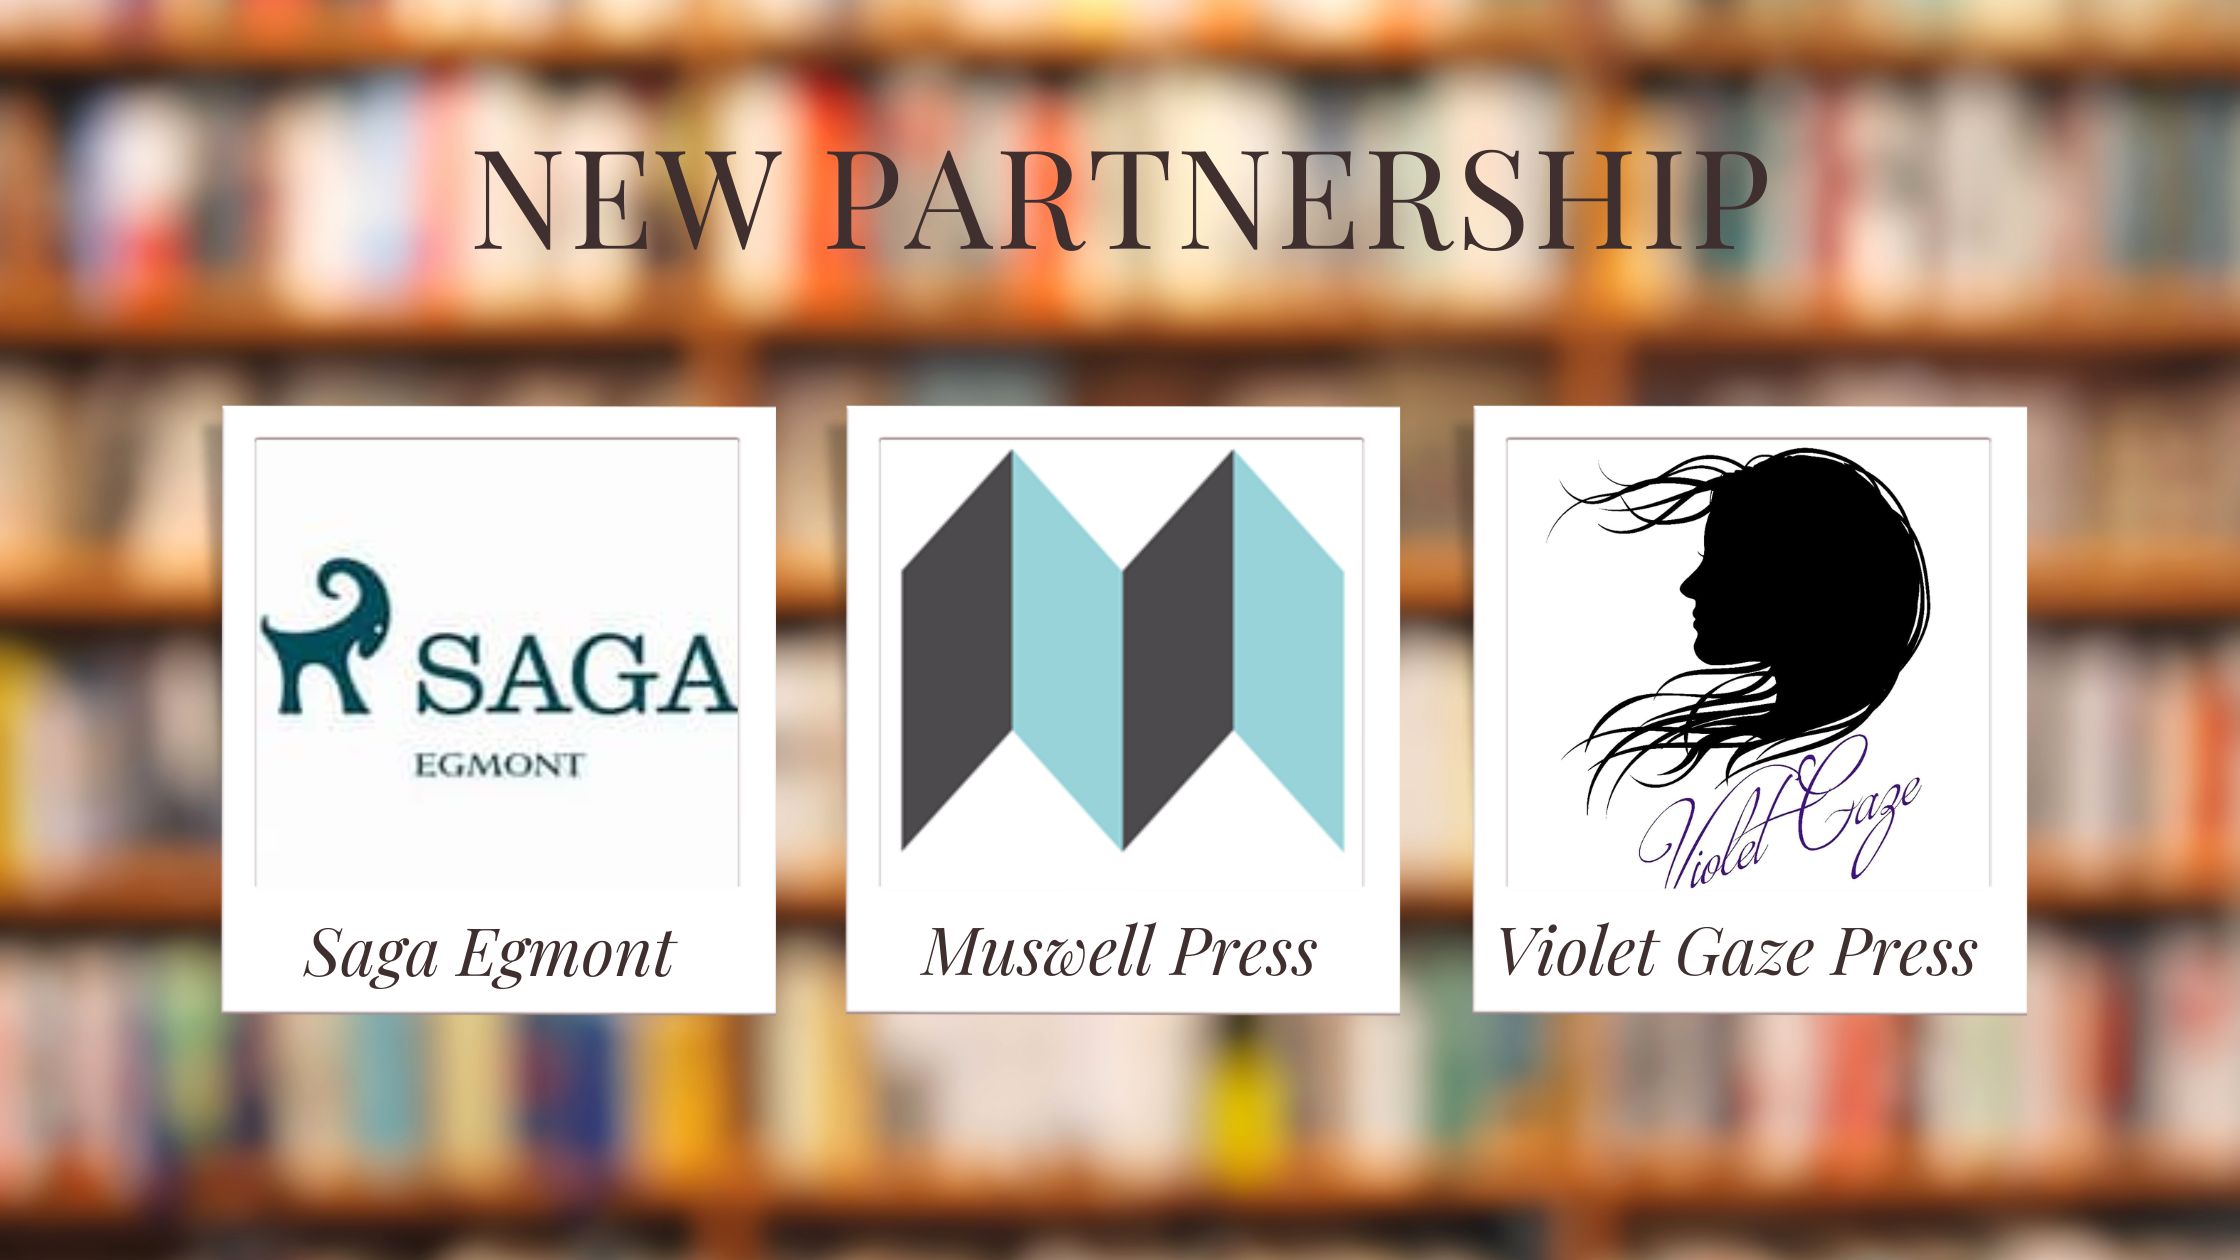 Saga Egmont announces 2 exciting partnerships with a focus on bringing more inclusivity to audio publishing